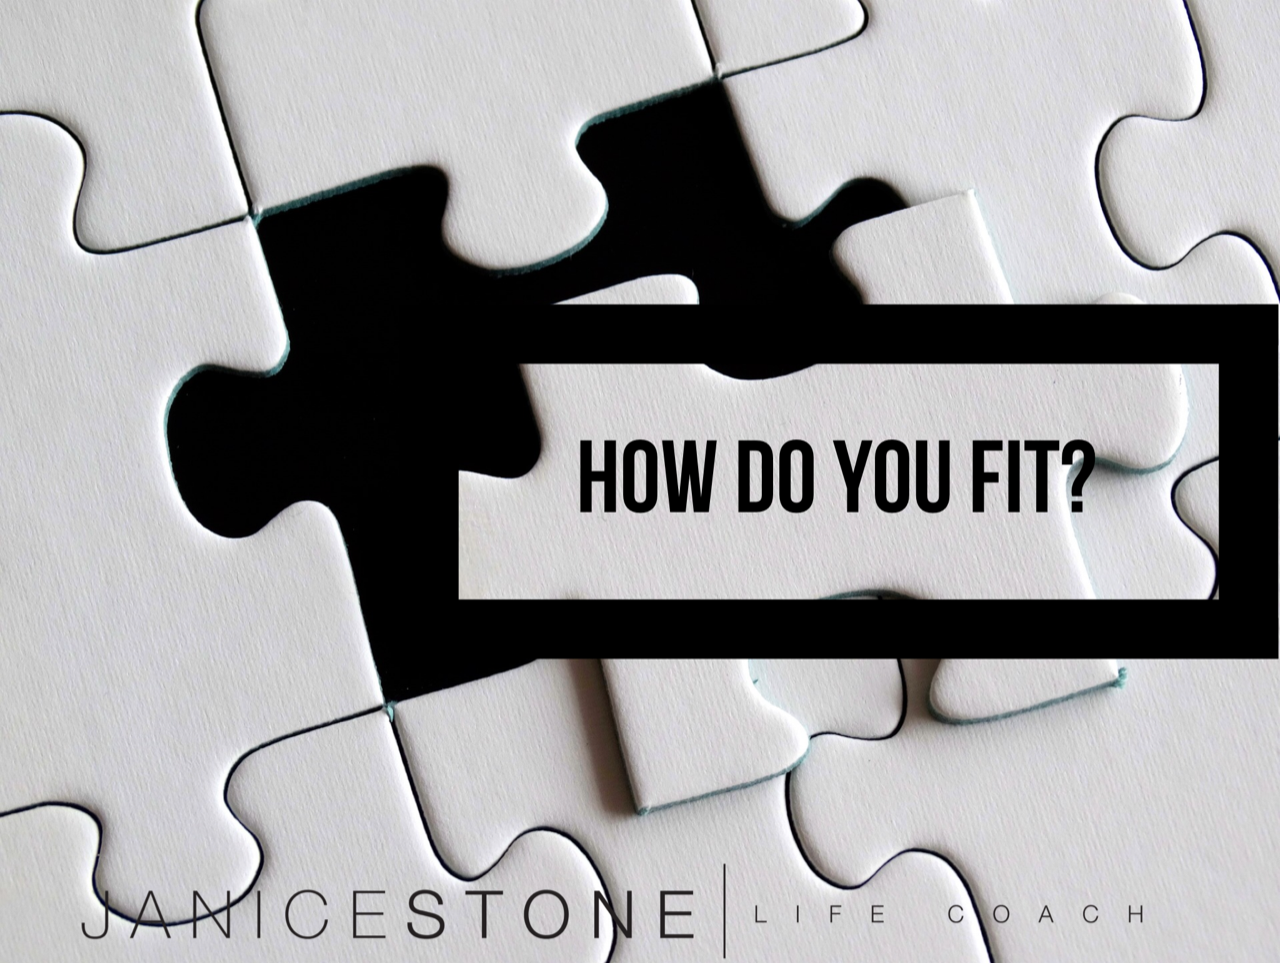 How Do I Fit? by Janice Stone